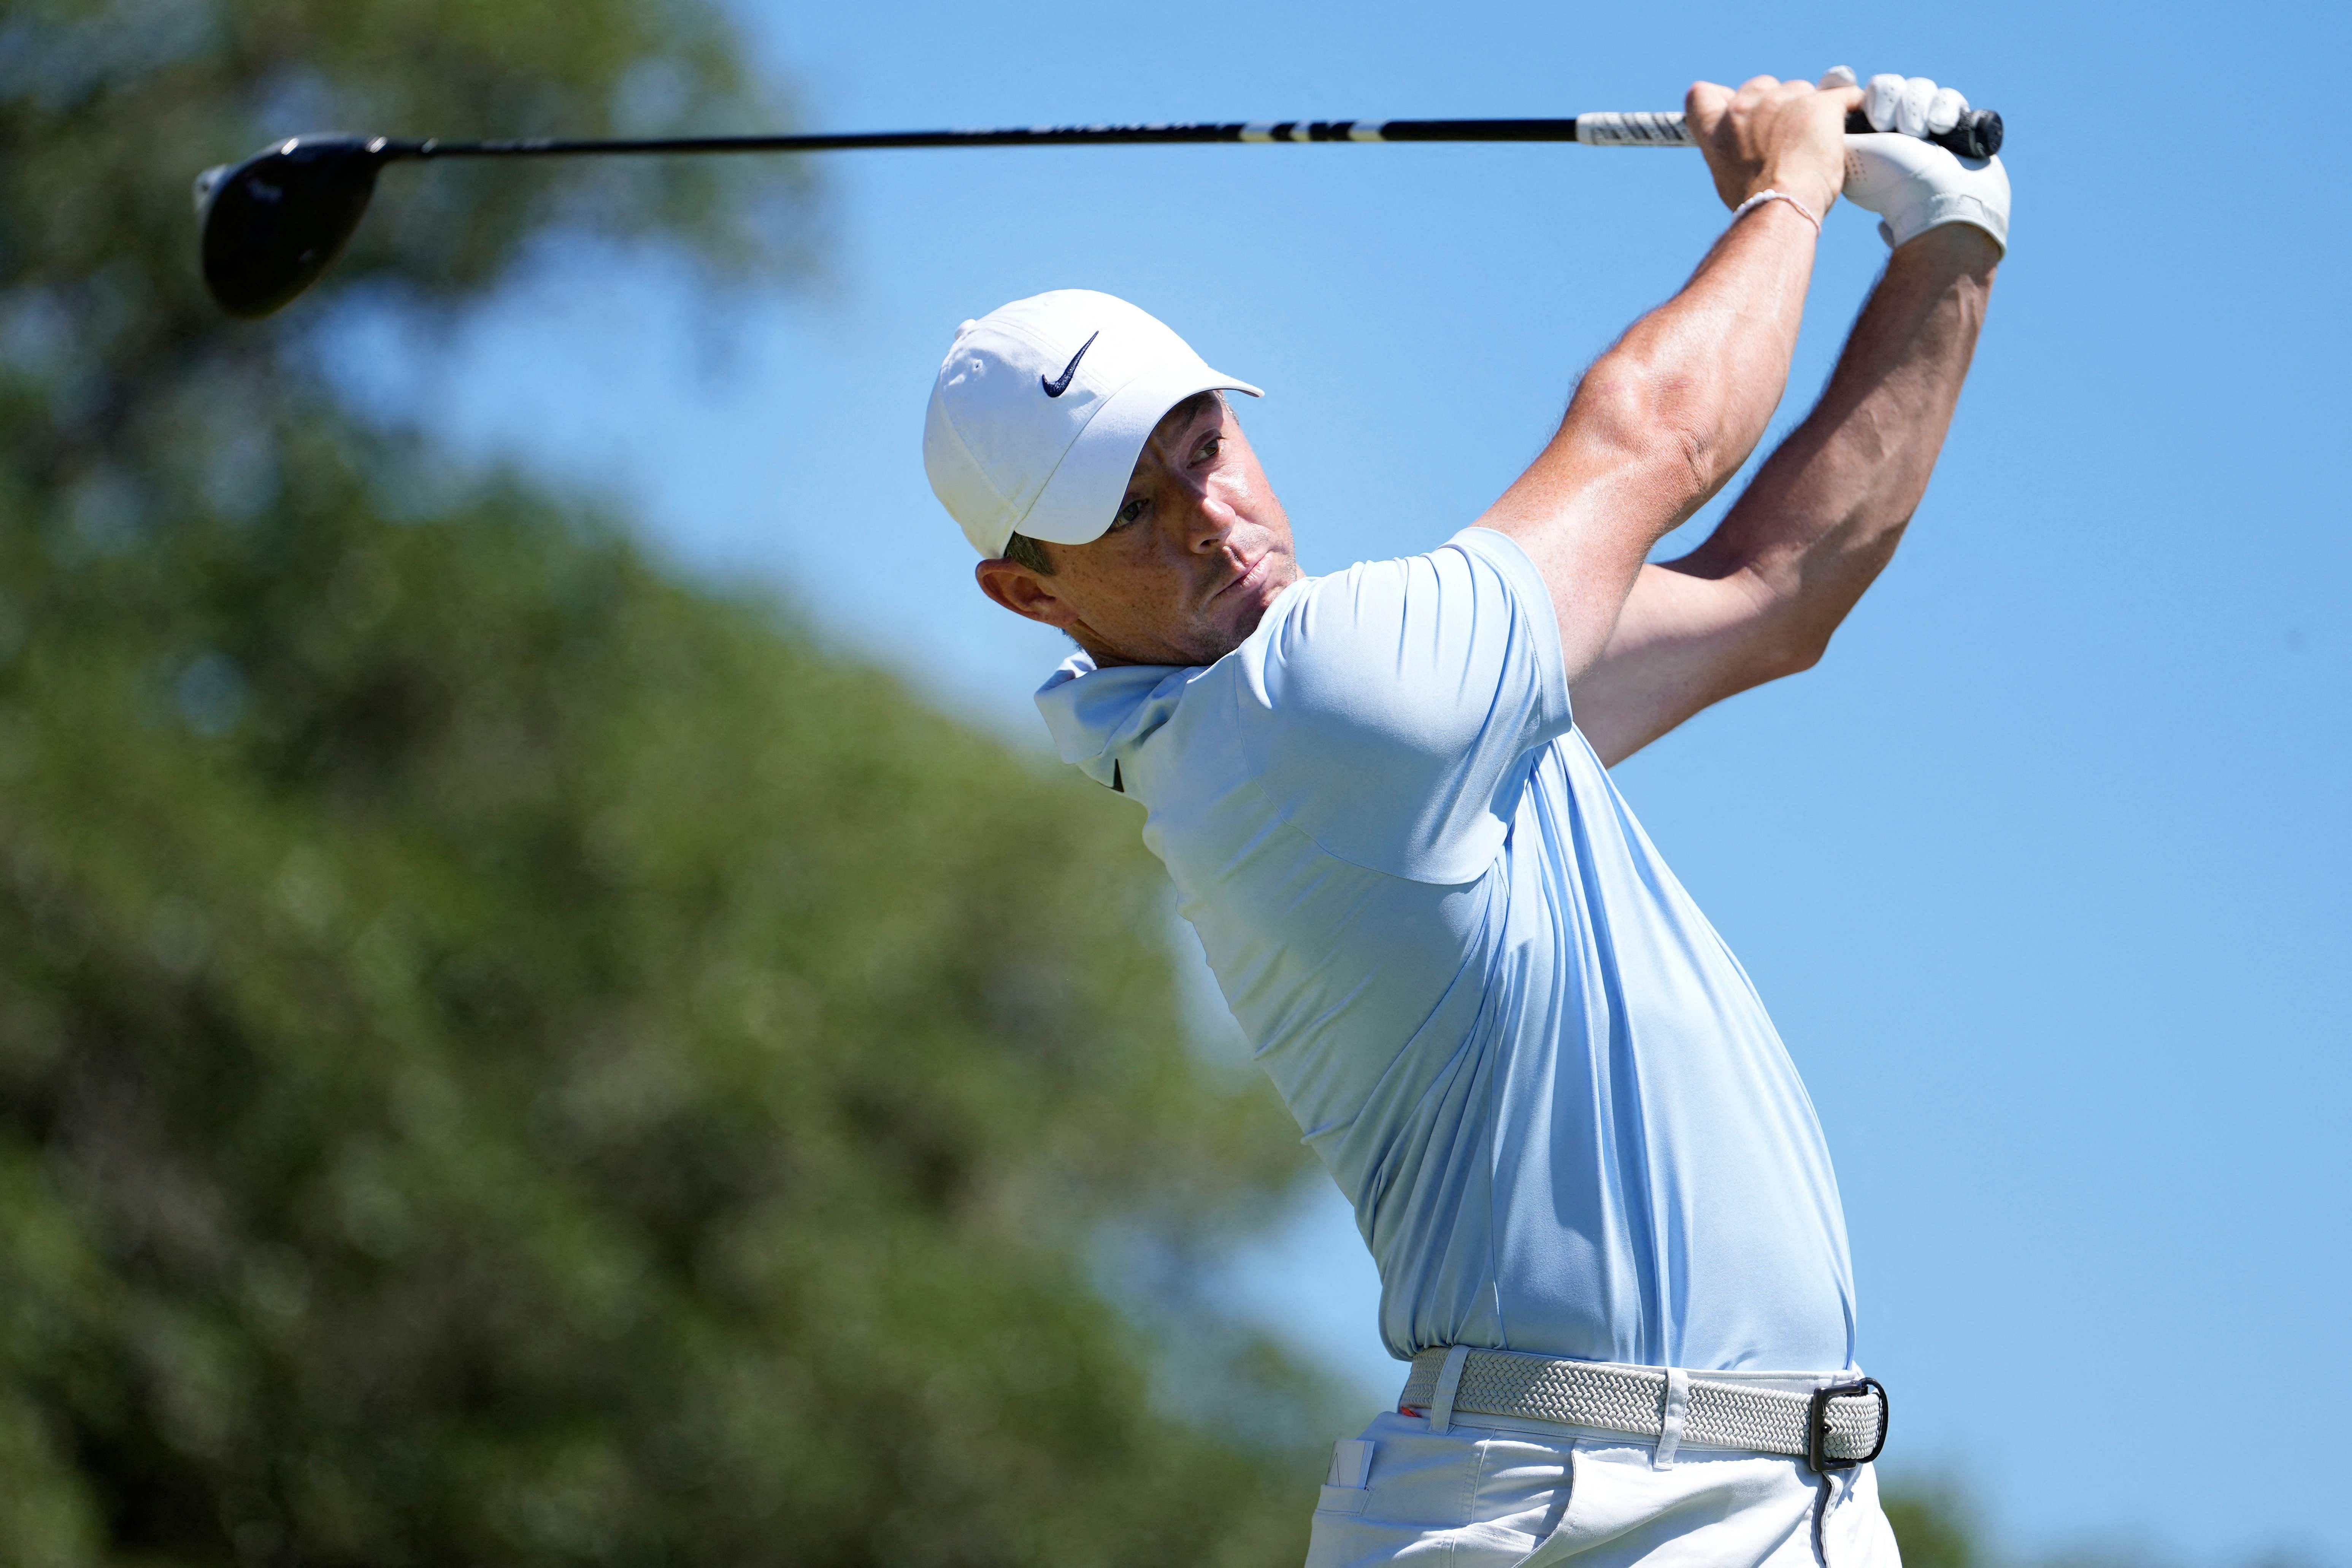 McIlroy works with Woods’ former coach Harmon ahead of final Masters tune-up